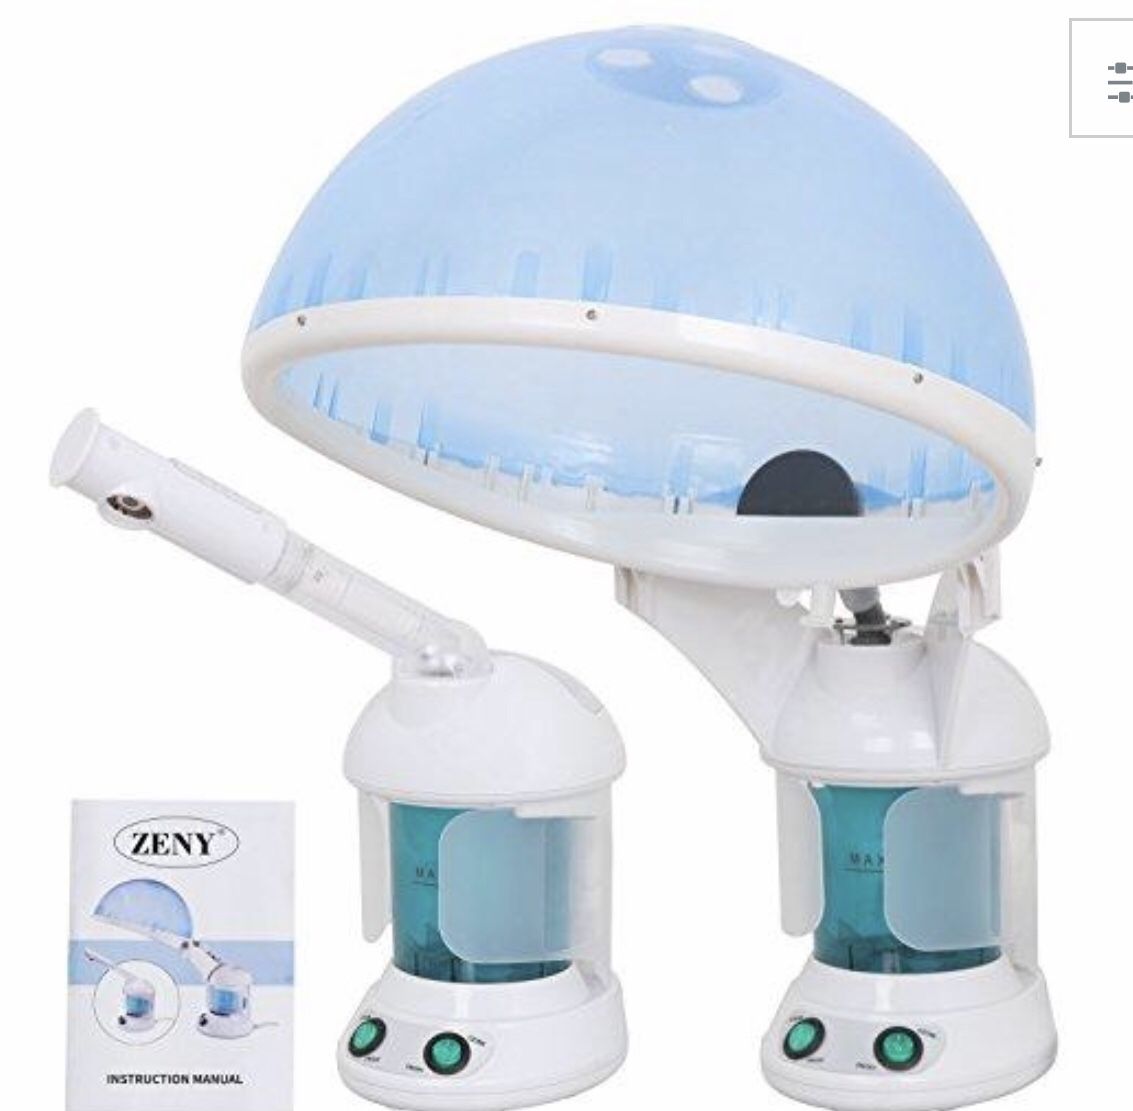 ZENY 2 IN 1 HAIR AND FACIAL STEAMER!!!